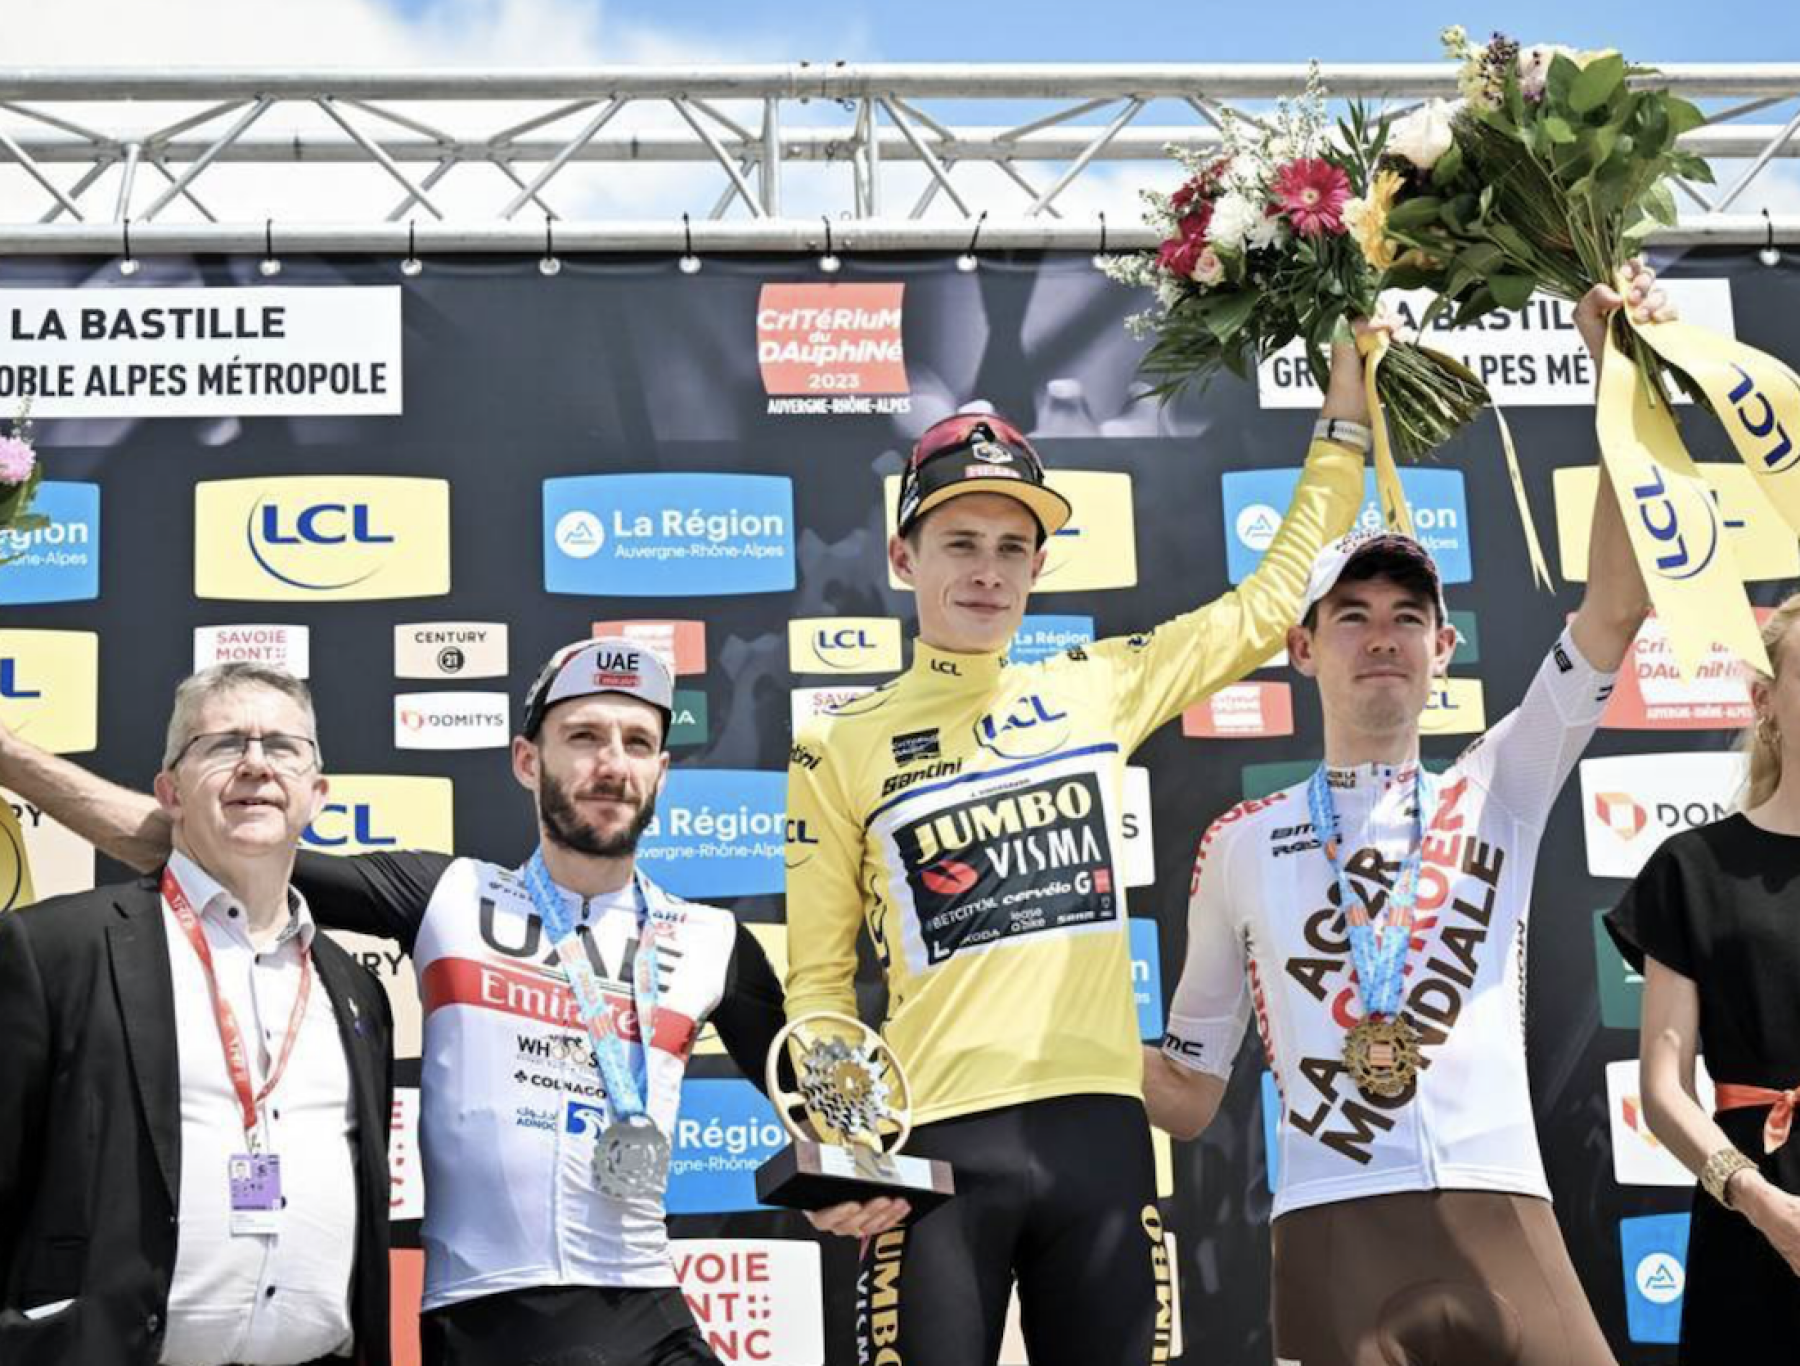 Critérium du Dauphiné 2023: Everything you need to know